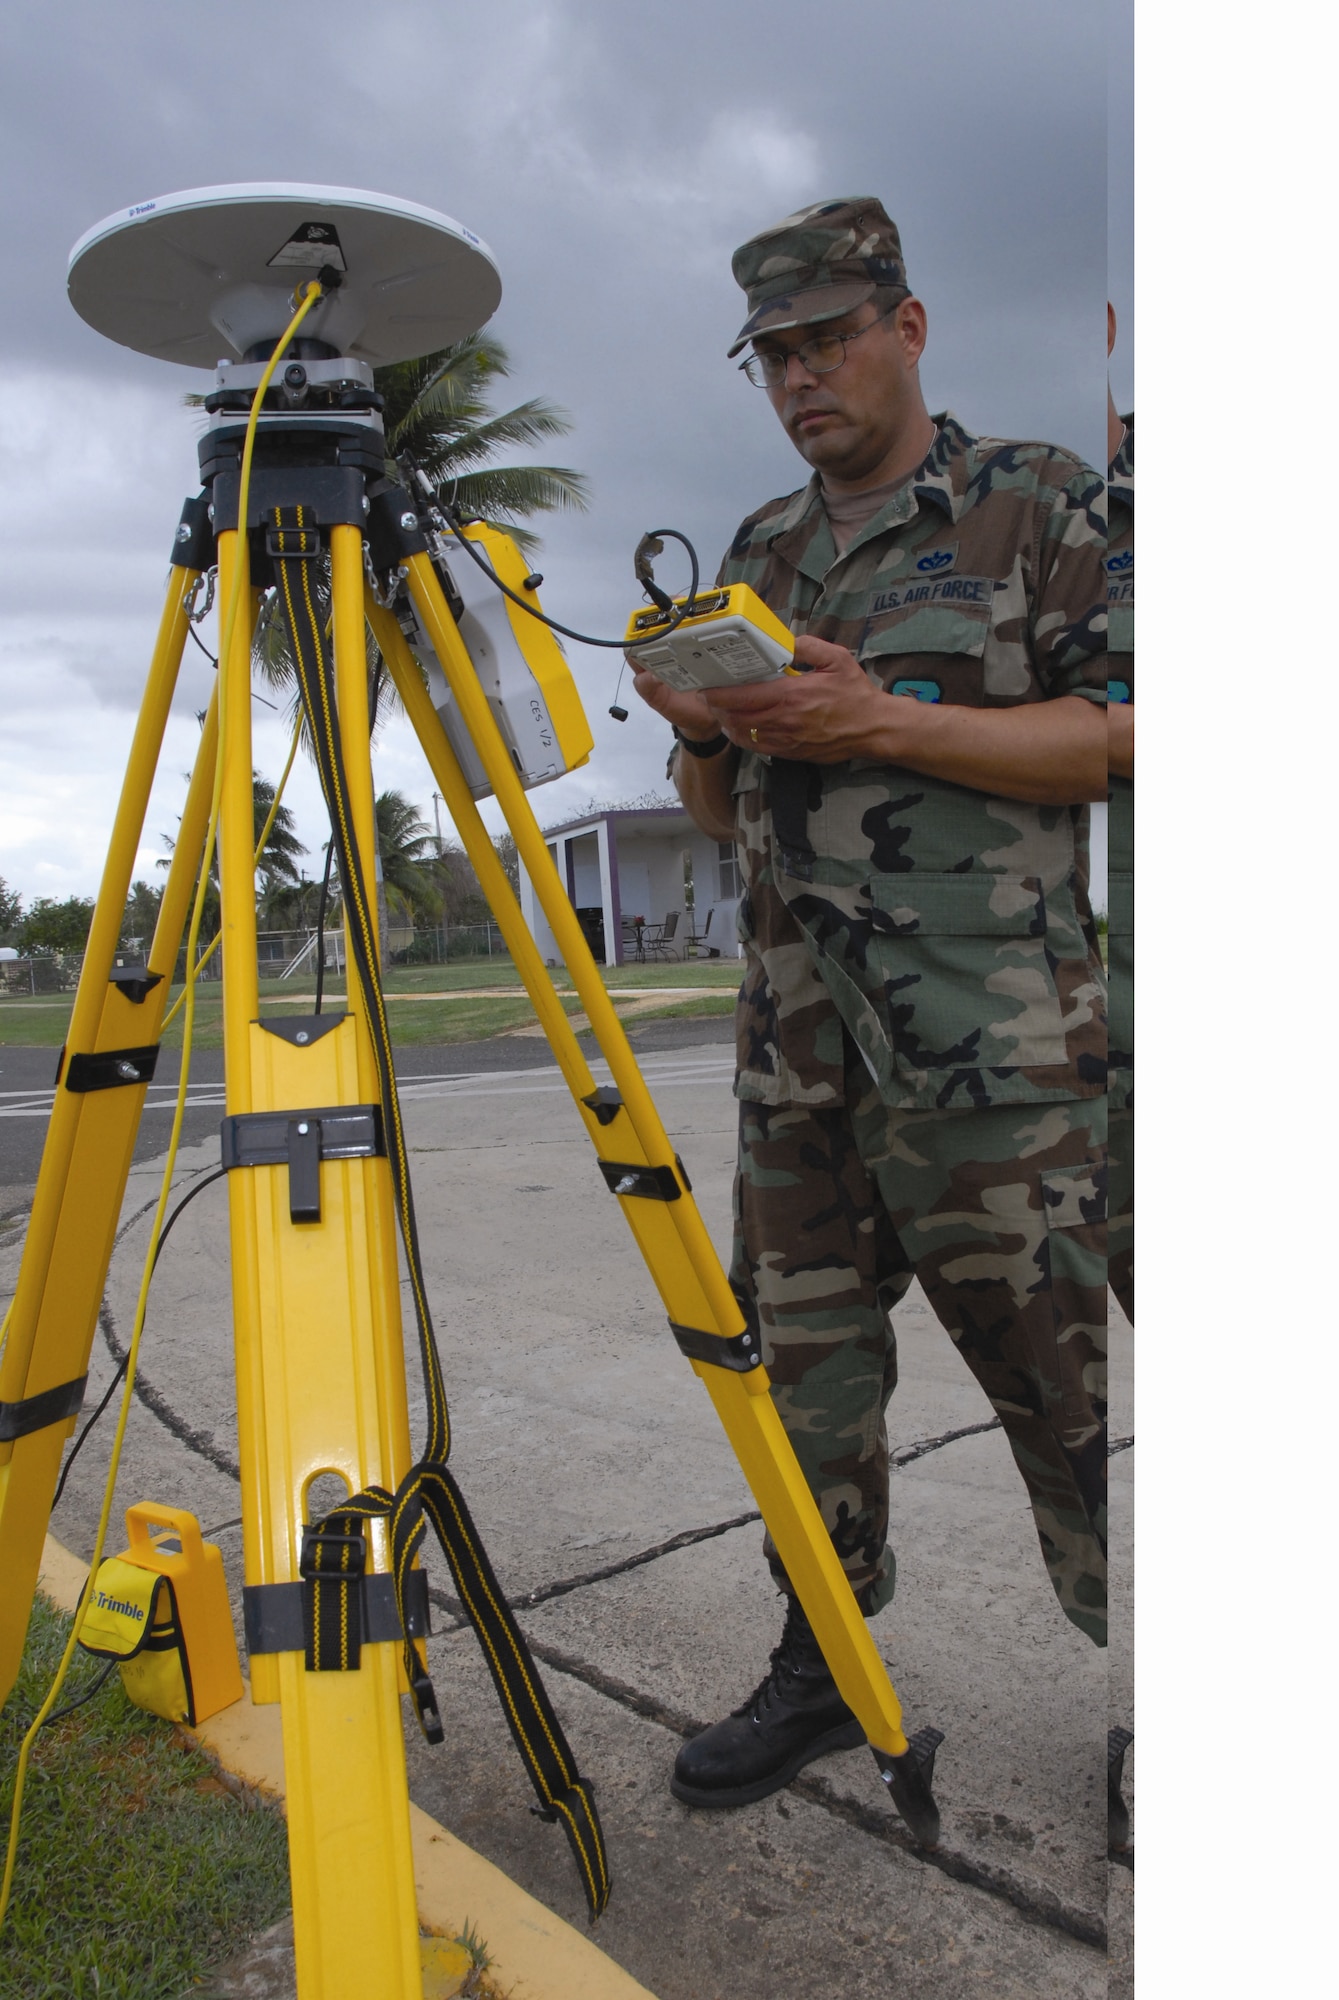 Technical Sgt. Raymond Linares uses GPS equipment to survey the surrounding work site during a deployment for training at U.S. Coast Guard Air Station Borinquen, Puerto Rico on March 6. Members of the 163rd Civil Engineering Squadron deployed to Puerto Rico to help with the renovation of a base facility. (U.S. Air Force photo by Senior Airman Diane Ducat )